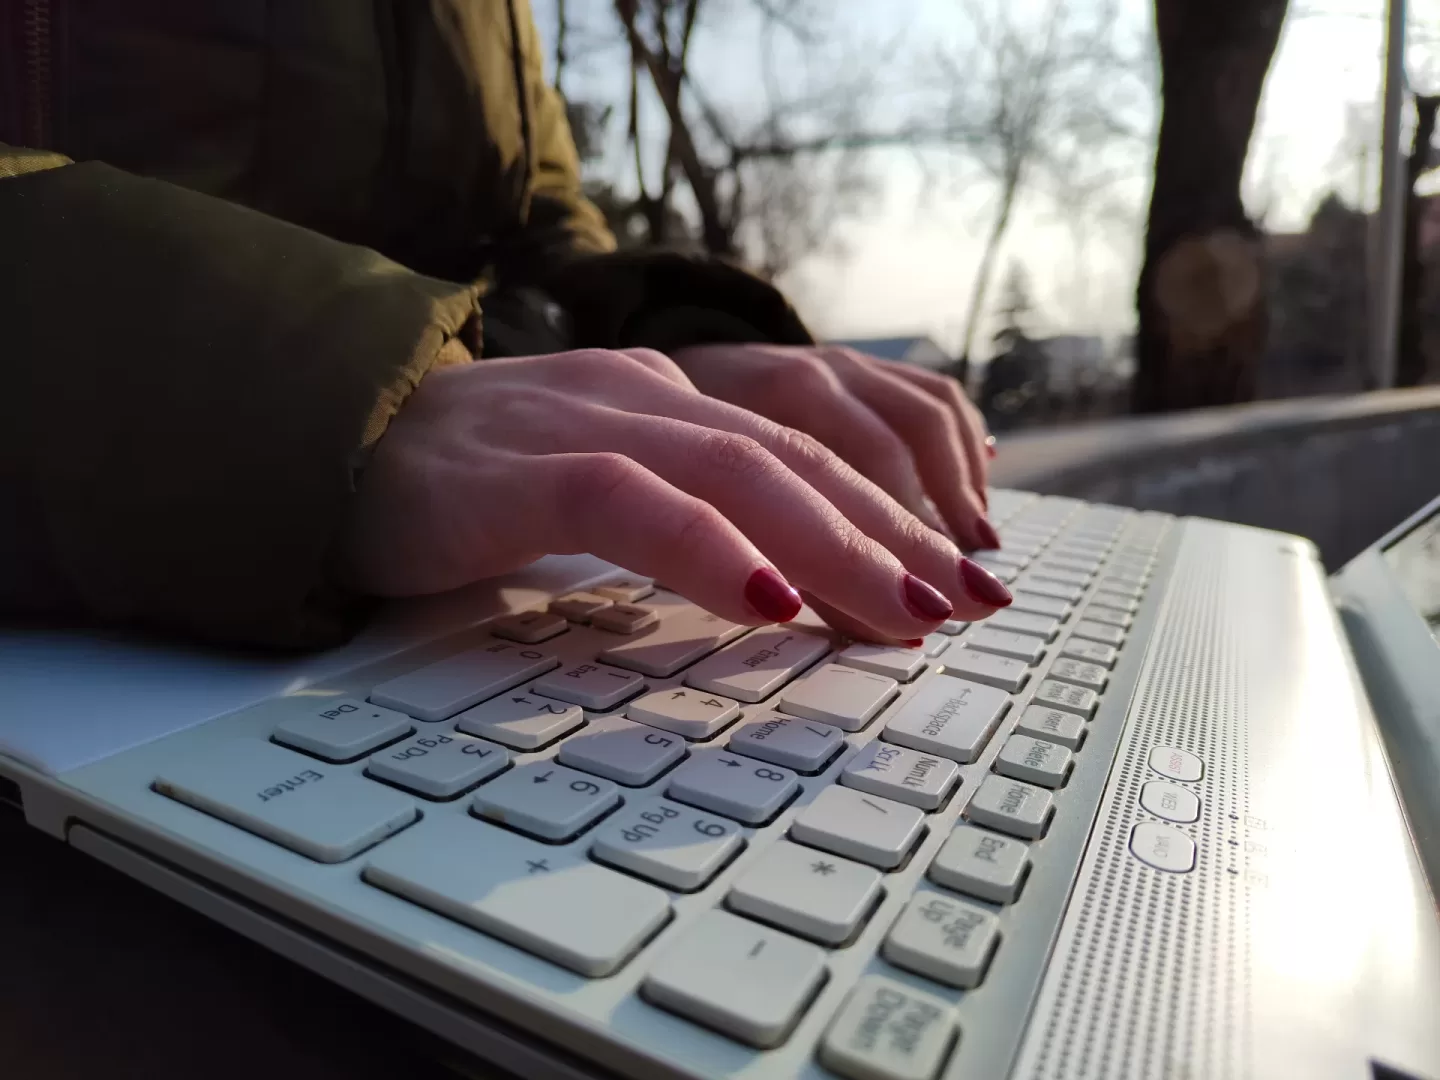 Hands typing on laptop outdoors, red nails visible.